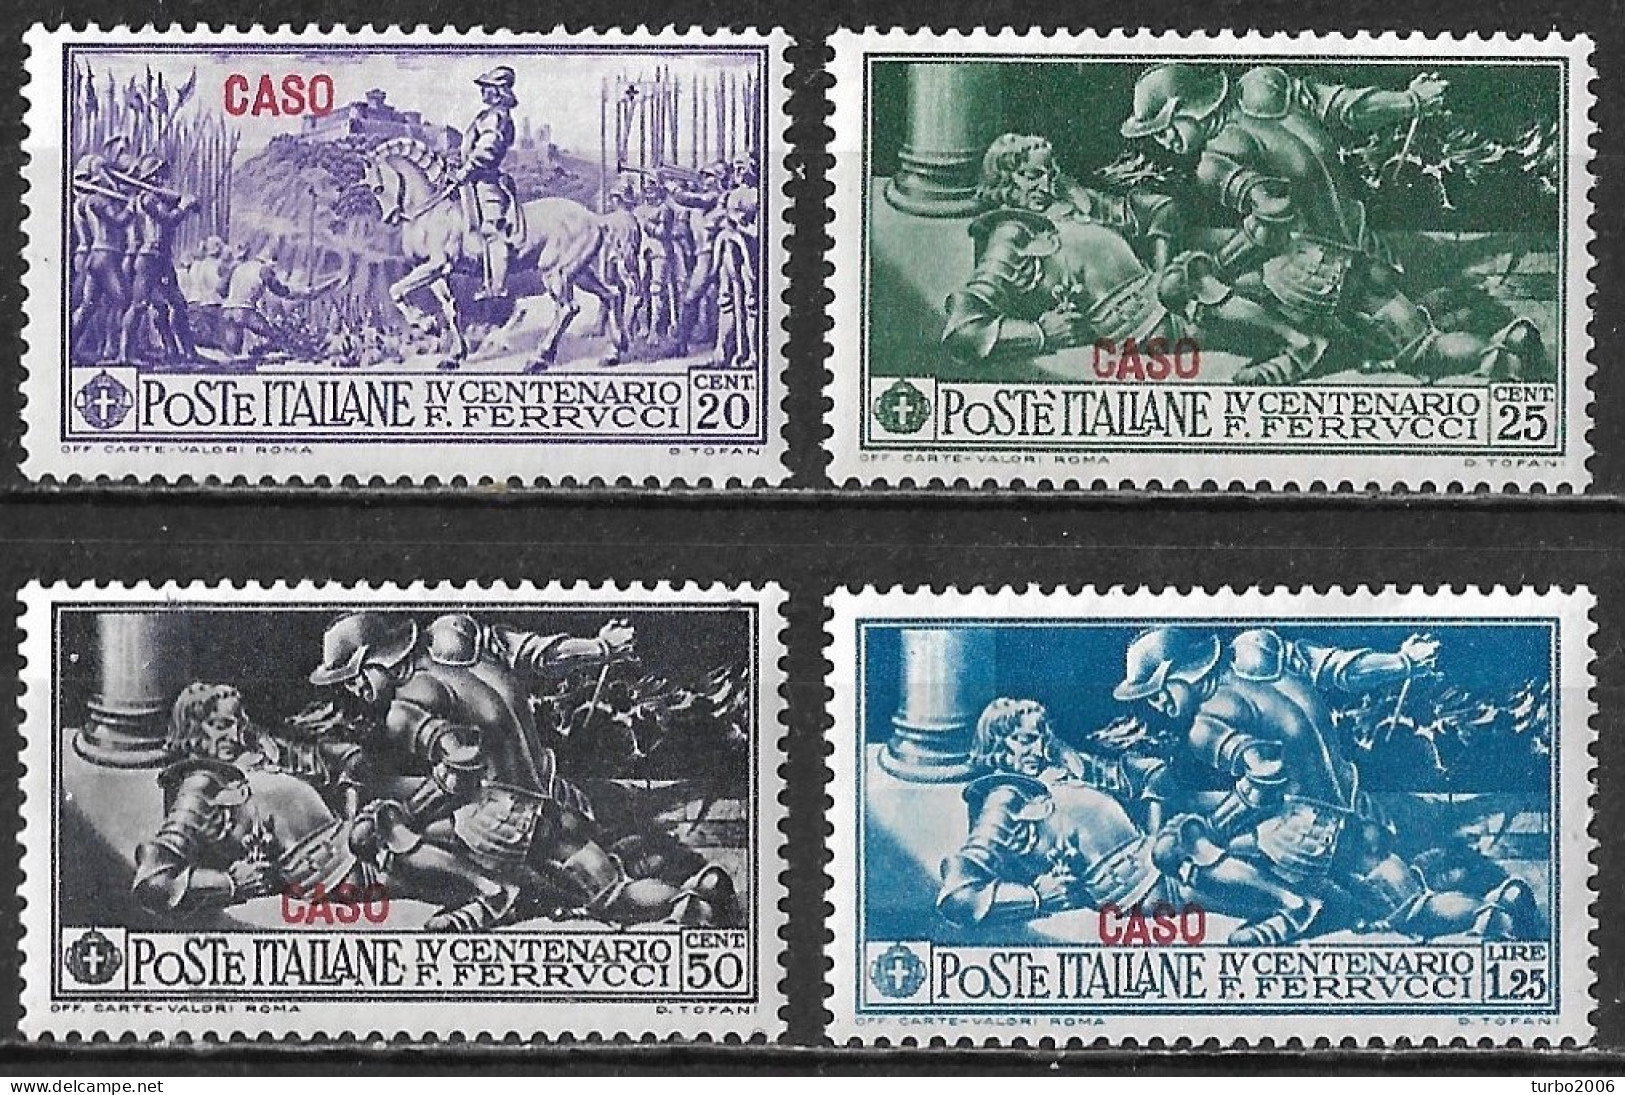 DODECANESE 1930 Stamp Of Italy Ferrucci Set With Overprint CASO 4 Values From The Set Vl. 12 / 15 MH - Dodecaneso